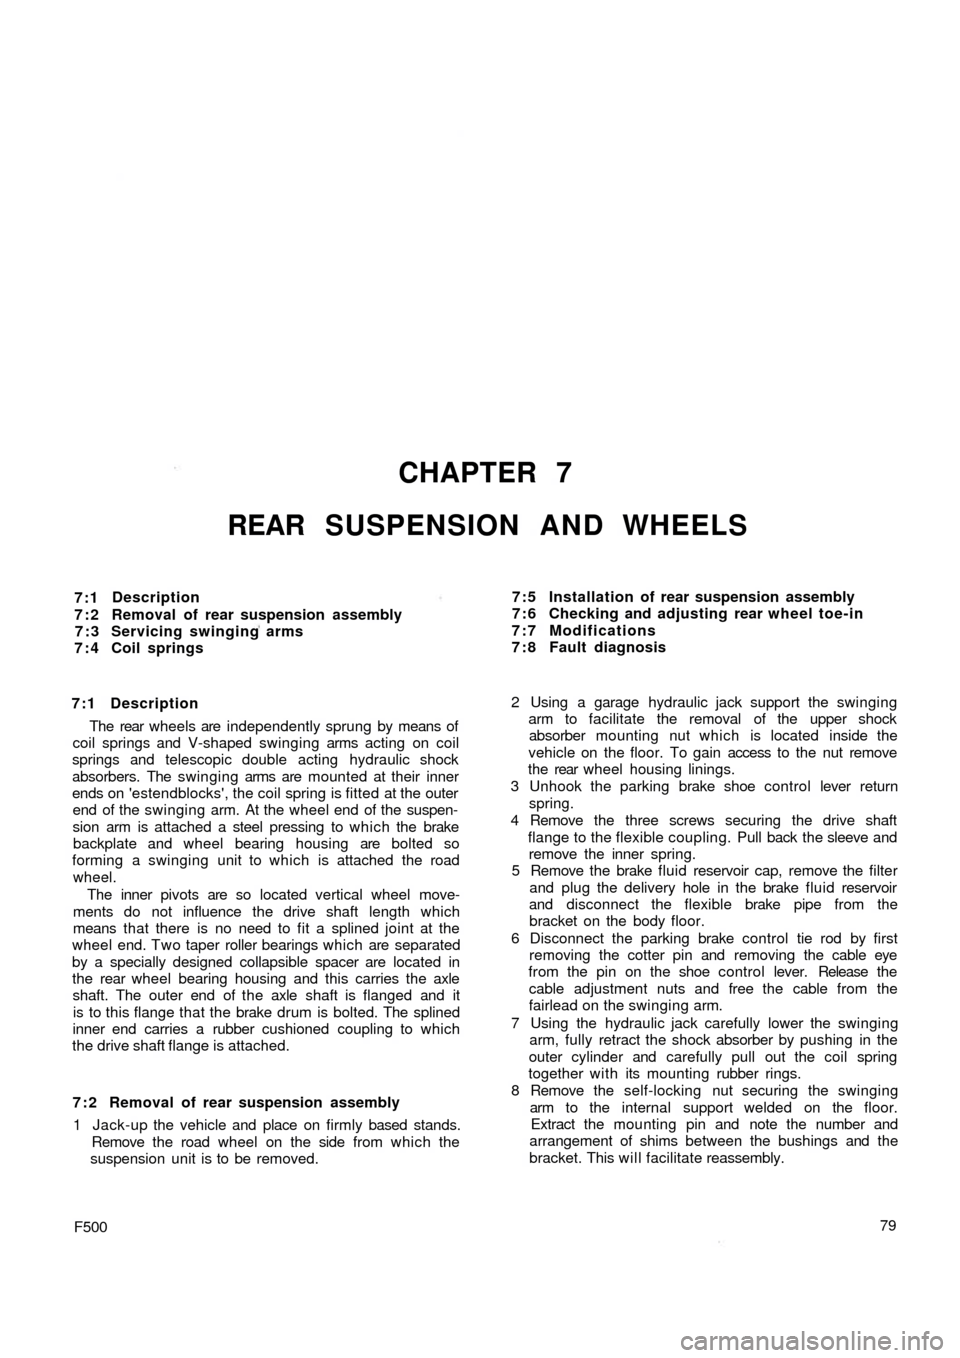 FIAT 500 1970 1.G Workshop Manual CHAPTER 7
REAR SUSPENSION AND WHEELS
7:1
7:2
7:3
7:4Description
Removal of rear suspension assembly
Servicing swinging arms
Coil springs
7:1 Description
The  rear  wheels are independently sprung by m